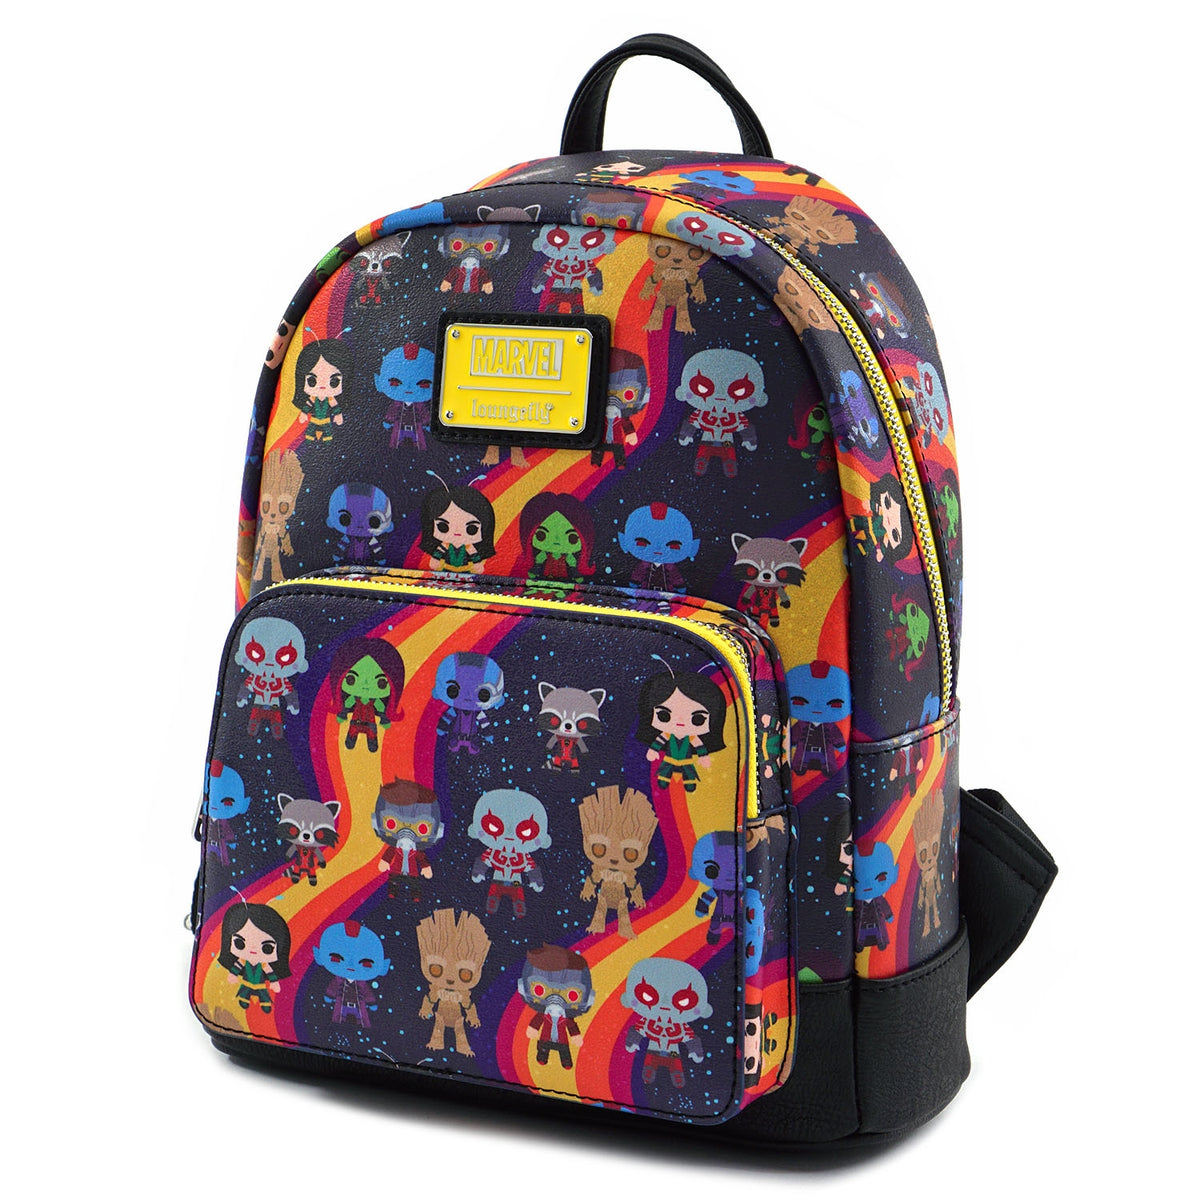 Loungefly Marvel Guardians of the Galaxy Chibi Mini Backpack NEW